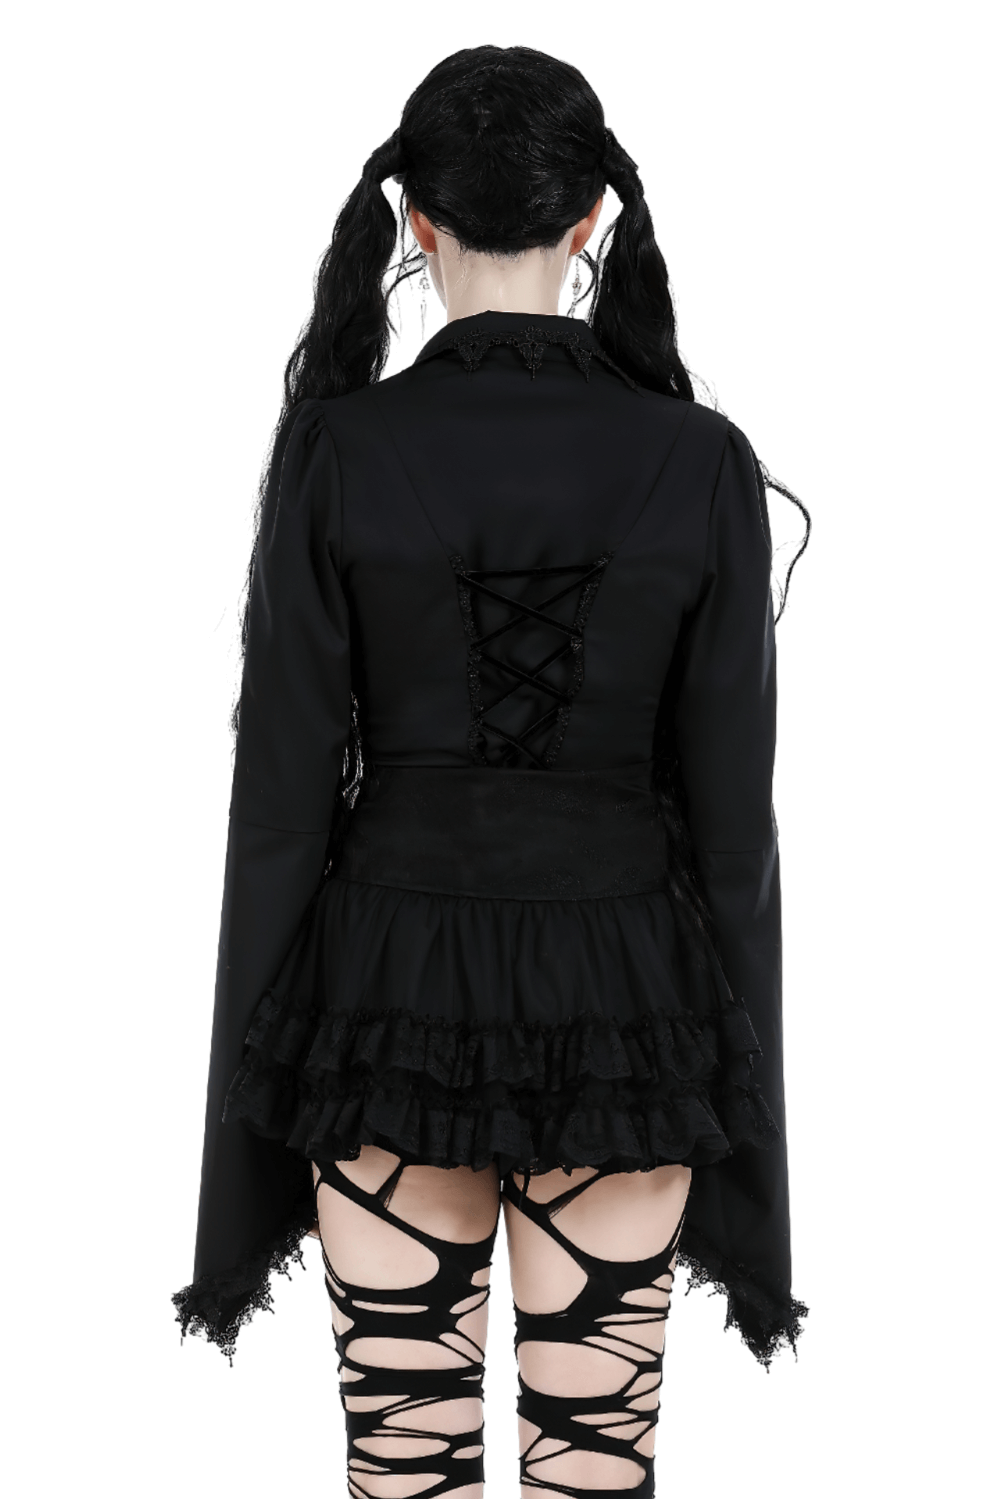 Black Gothic Shirt with Bell Sleeves and Zipper